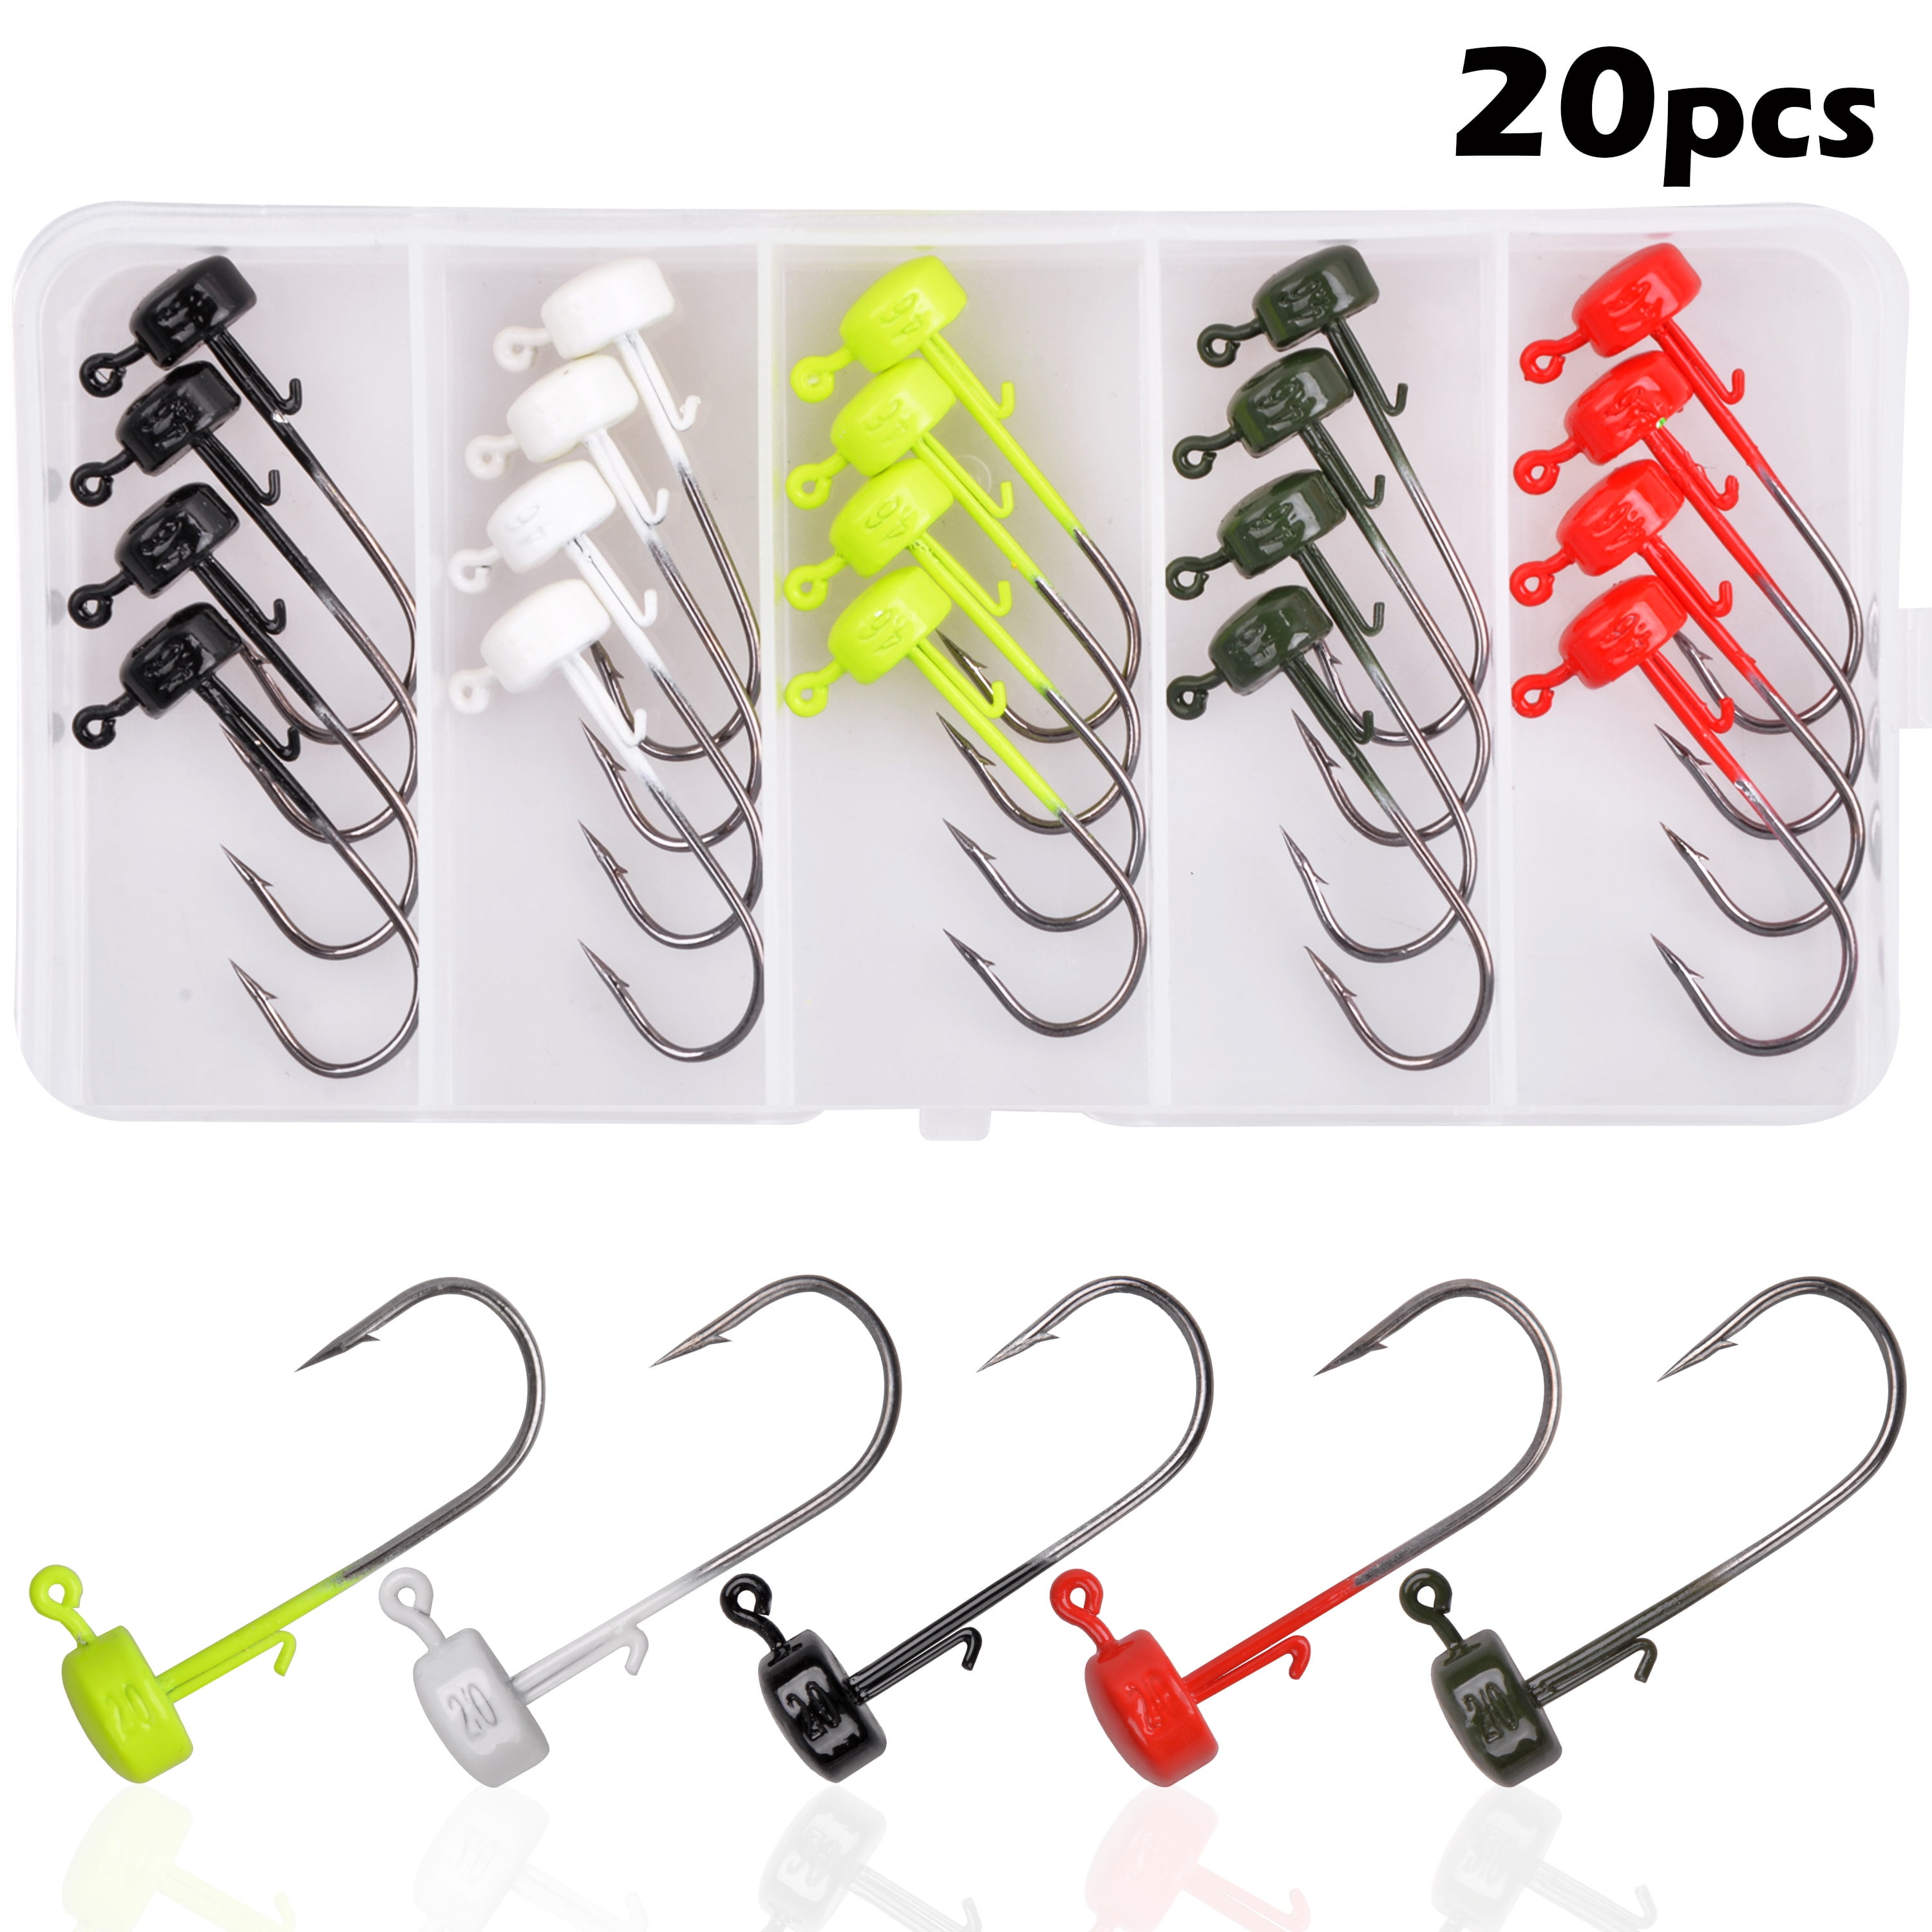 20PCS round swivels fishing small rig fishing tackle accessories